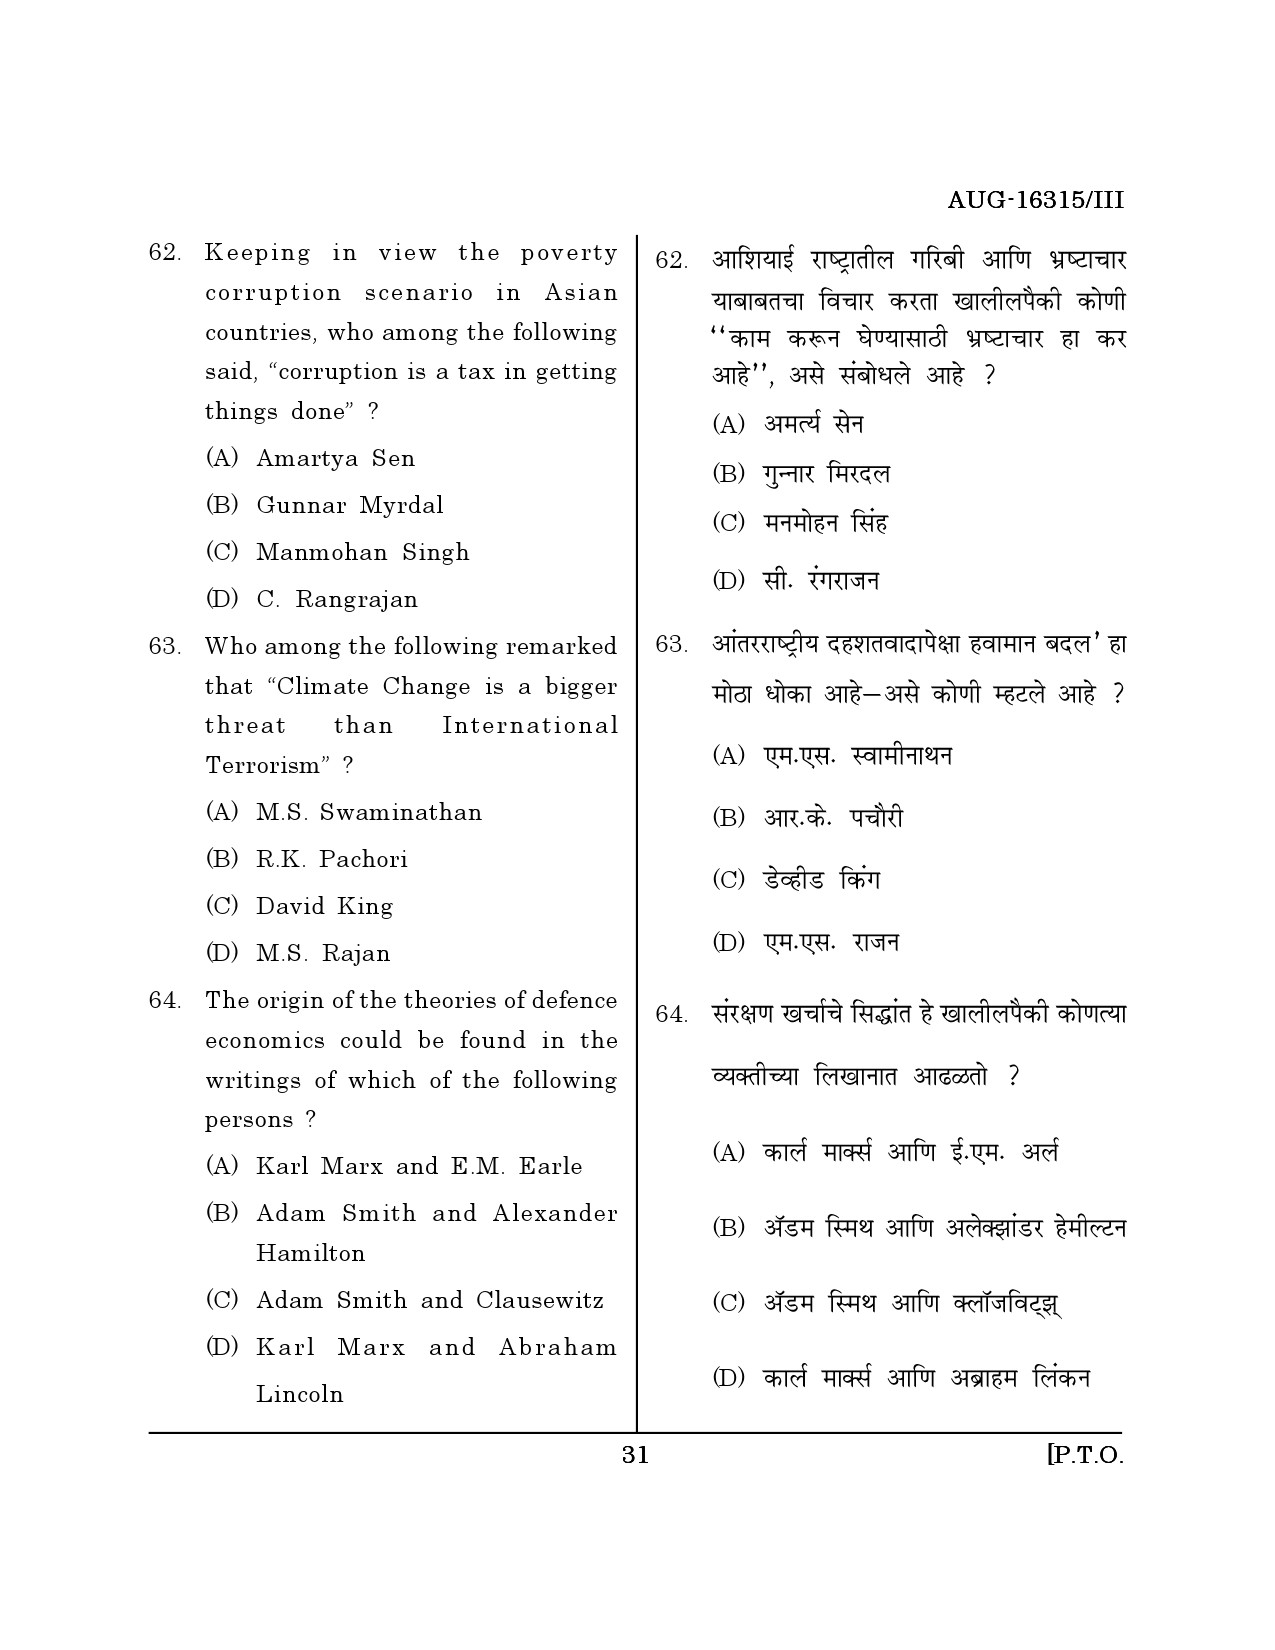 Maharashtra SET Defence and Strategic Studies Question Paper III August 2015 30